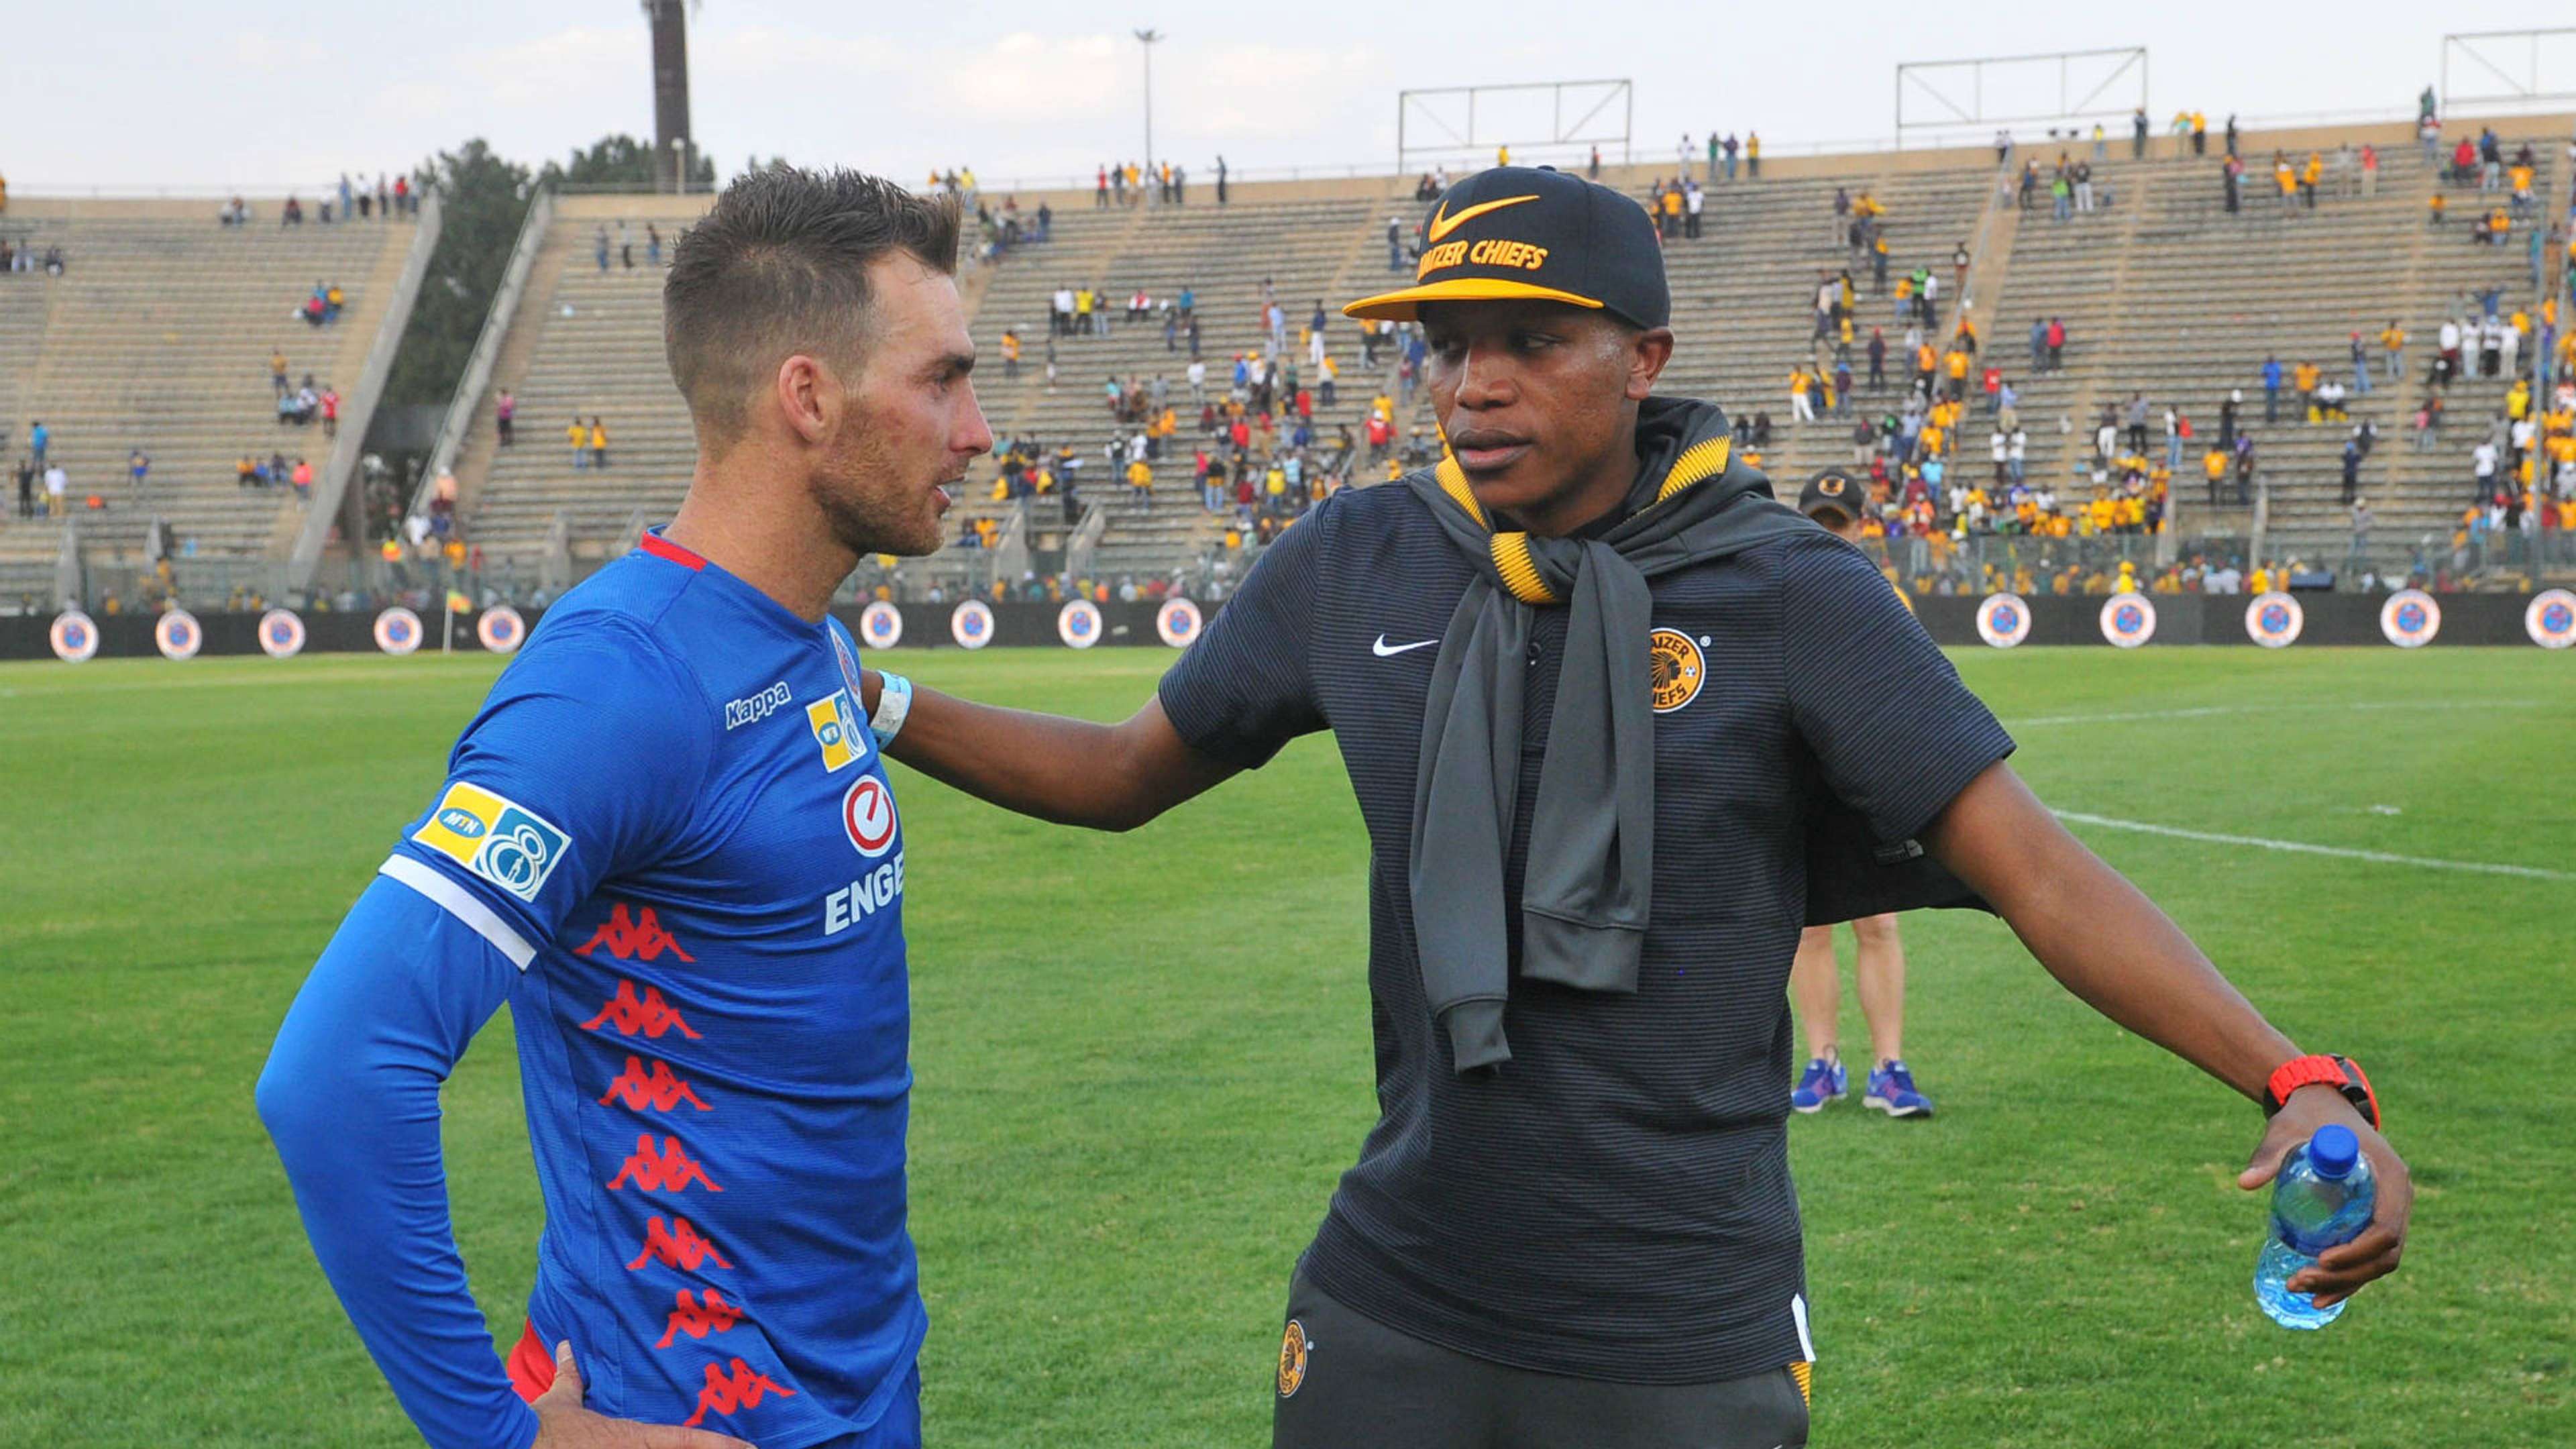 Lebogang Manyama of Kaizer Chiefs and Bradley Grobler of SuperSport United, August 2018